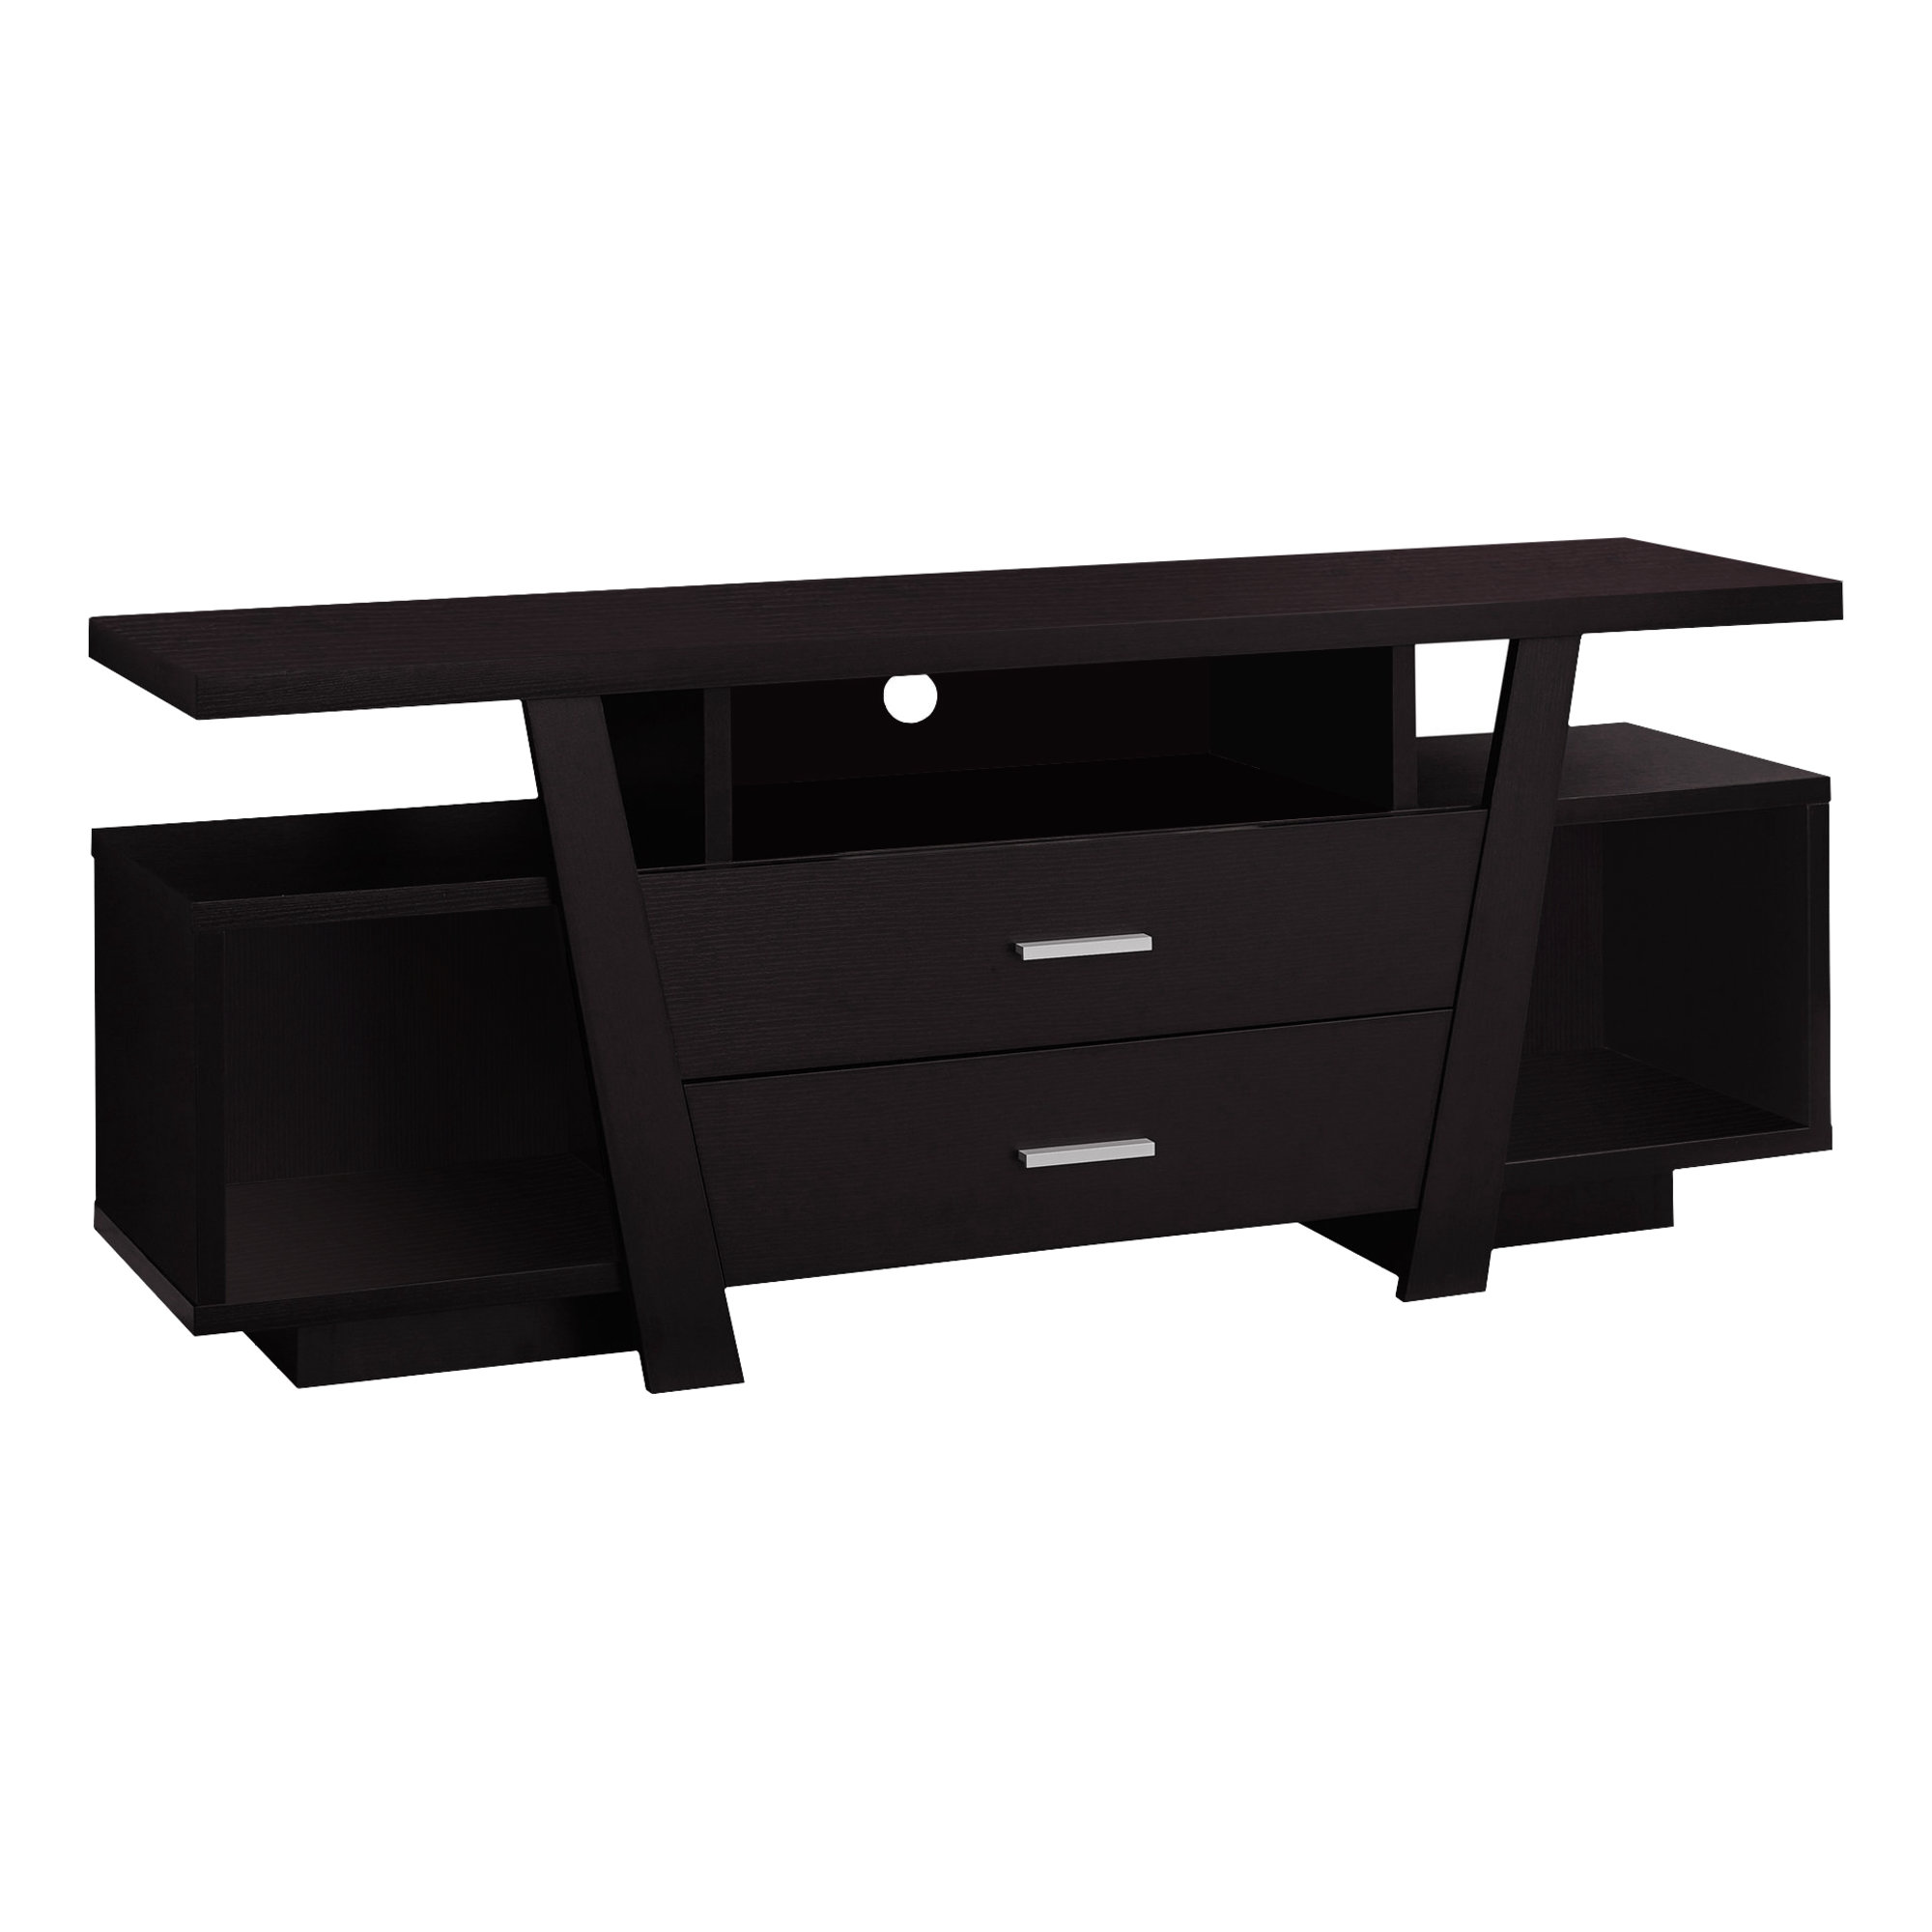 TV STAND - 60"L / CAPPUCCINO WITH 2 STORAGE DRAWERS